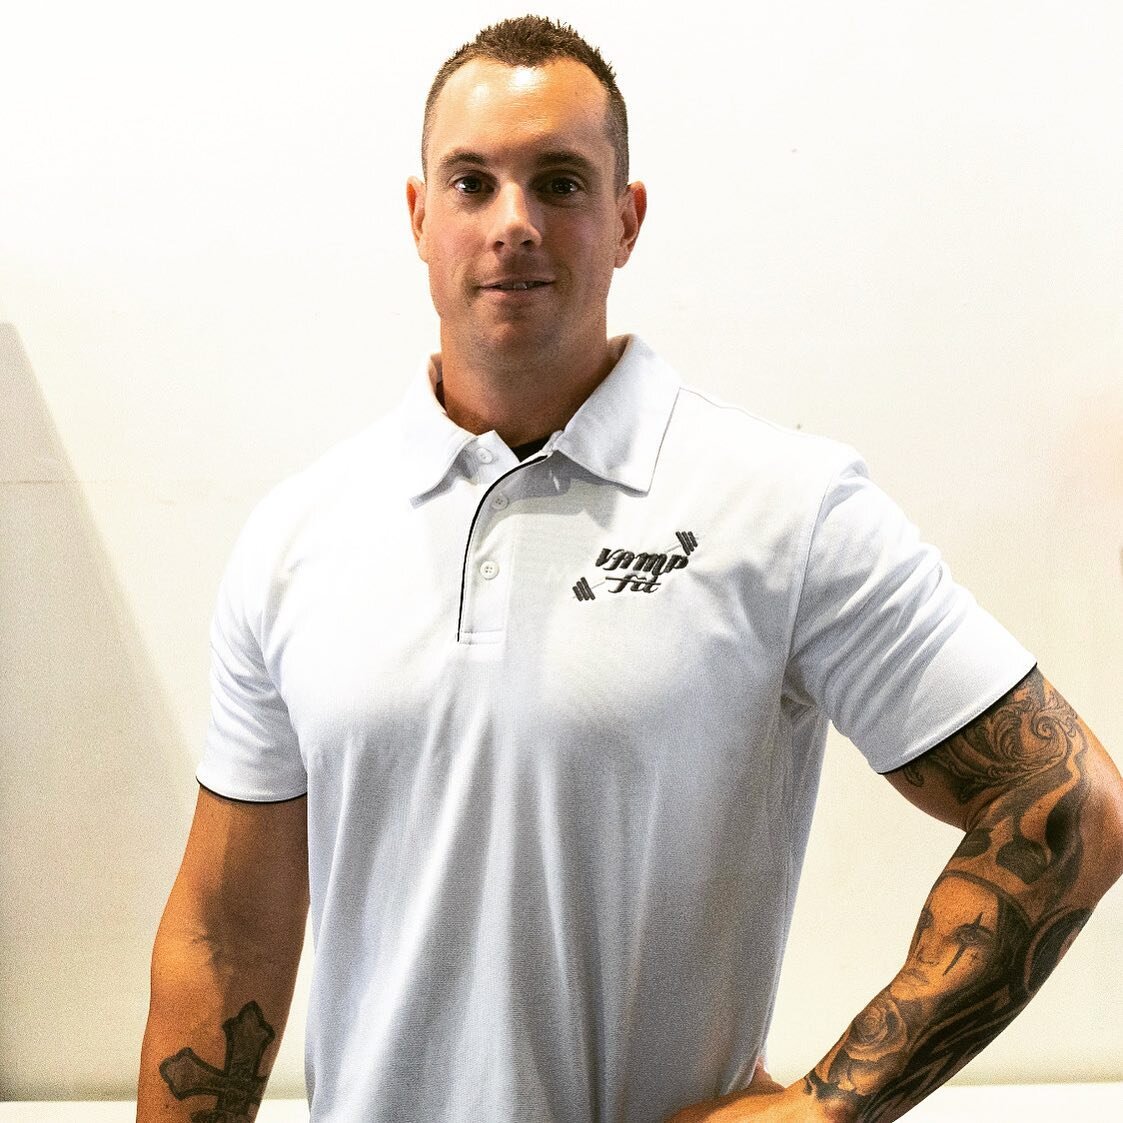 MEET THE TEAM @mk__fitt 

Get to know the Team @vampfit_ with the Month of May being Experience Month at VampFit. 
 
𝙈𝙖𝙩𝙩𝙮 𝙇𝙞𝙣𝙣𝙚𝙩𝙩
 @matty_linnett 
Head PT / Assistant Manager

About Me:
My passion is to have the most positive impact that